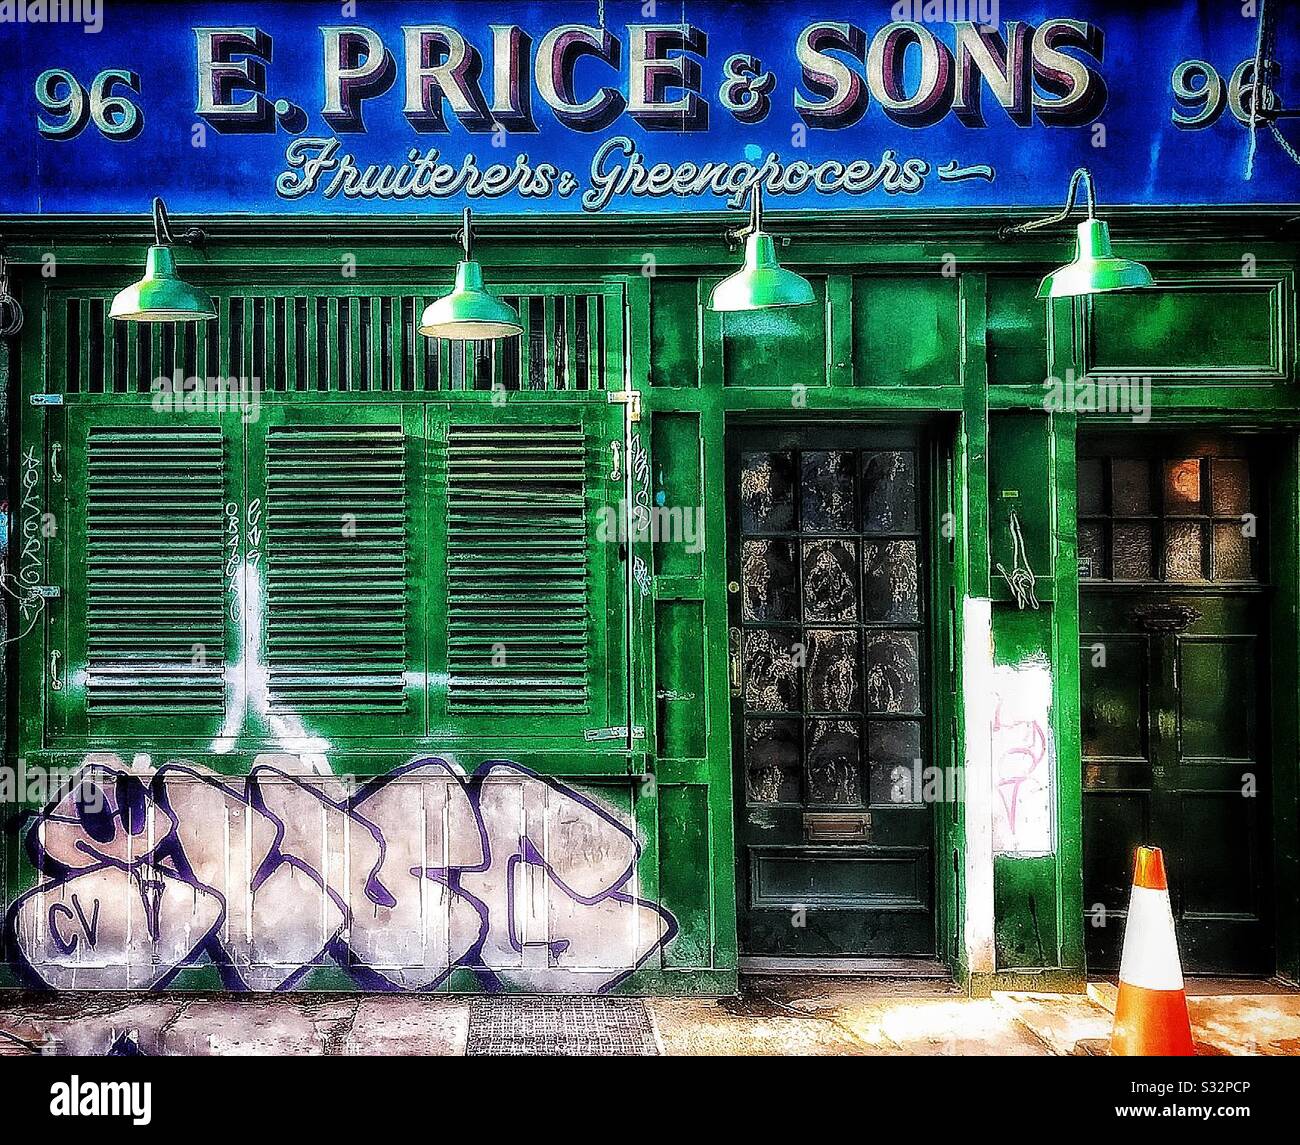 E. Price & Sons, Fruiterers, Greengrocers, Golborne Road, Notting Hill, London Stock Photo